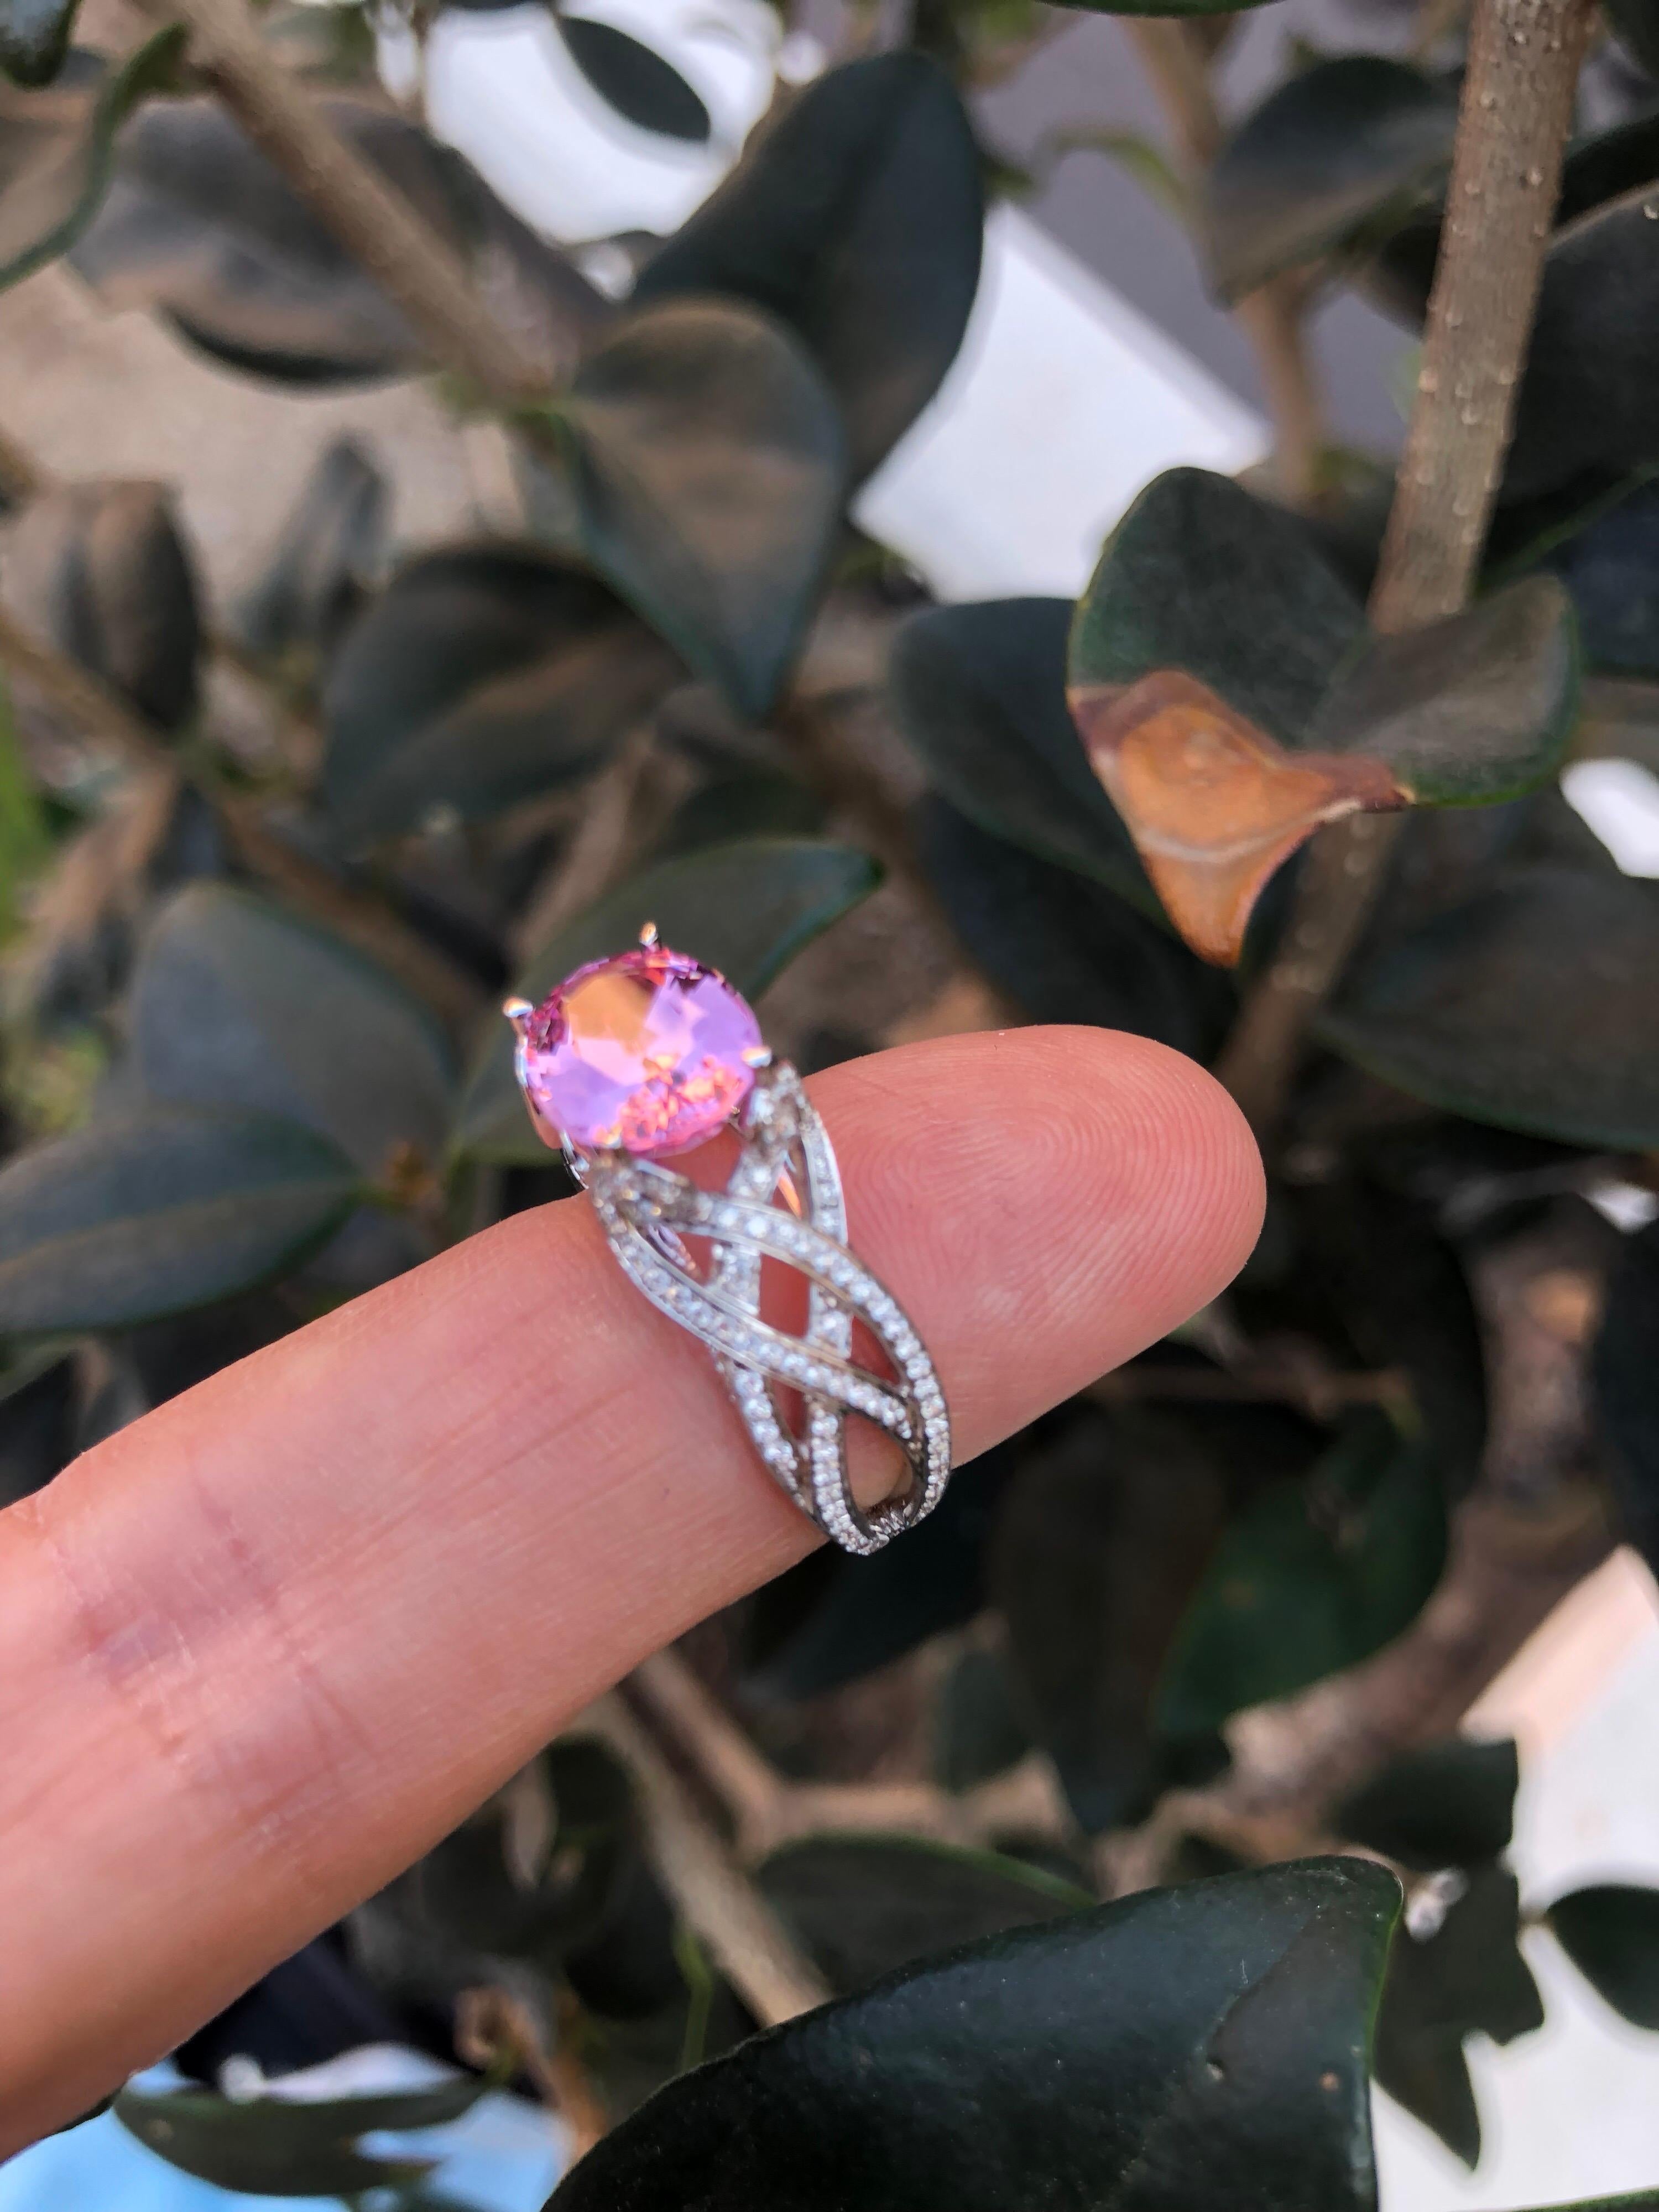 pink spinel engagement ring